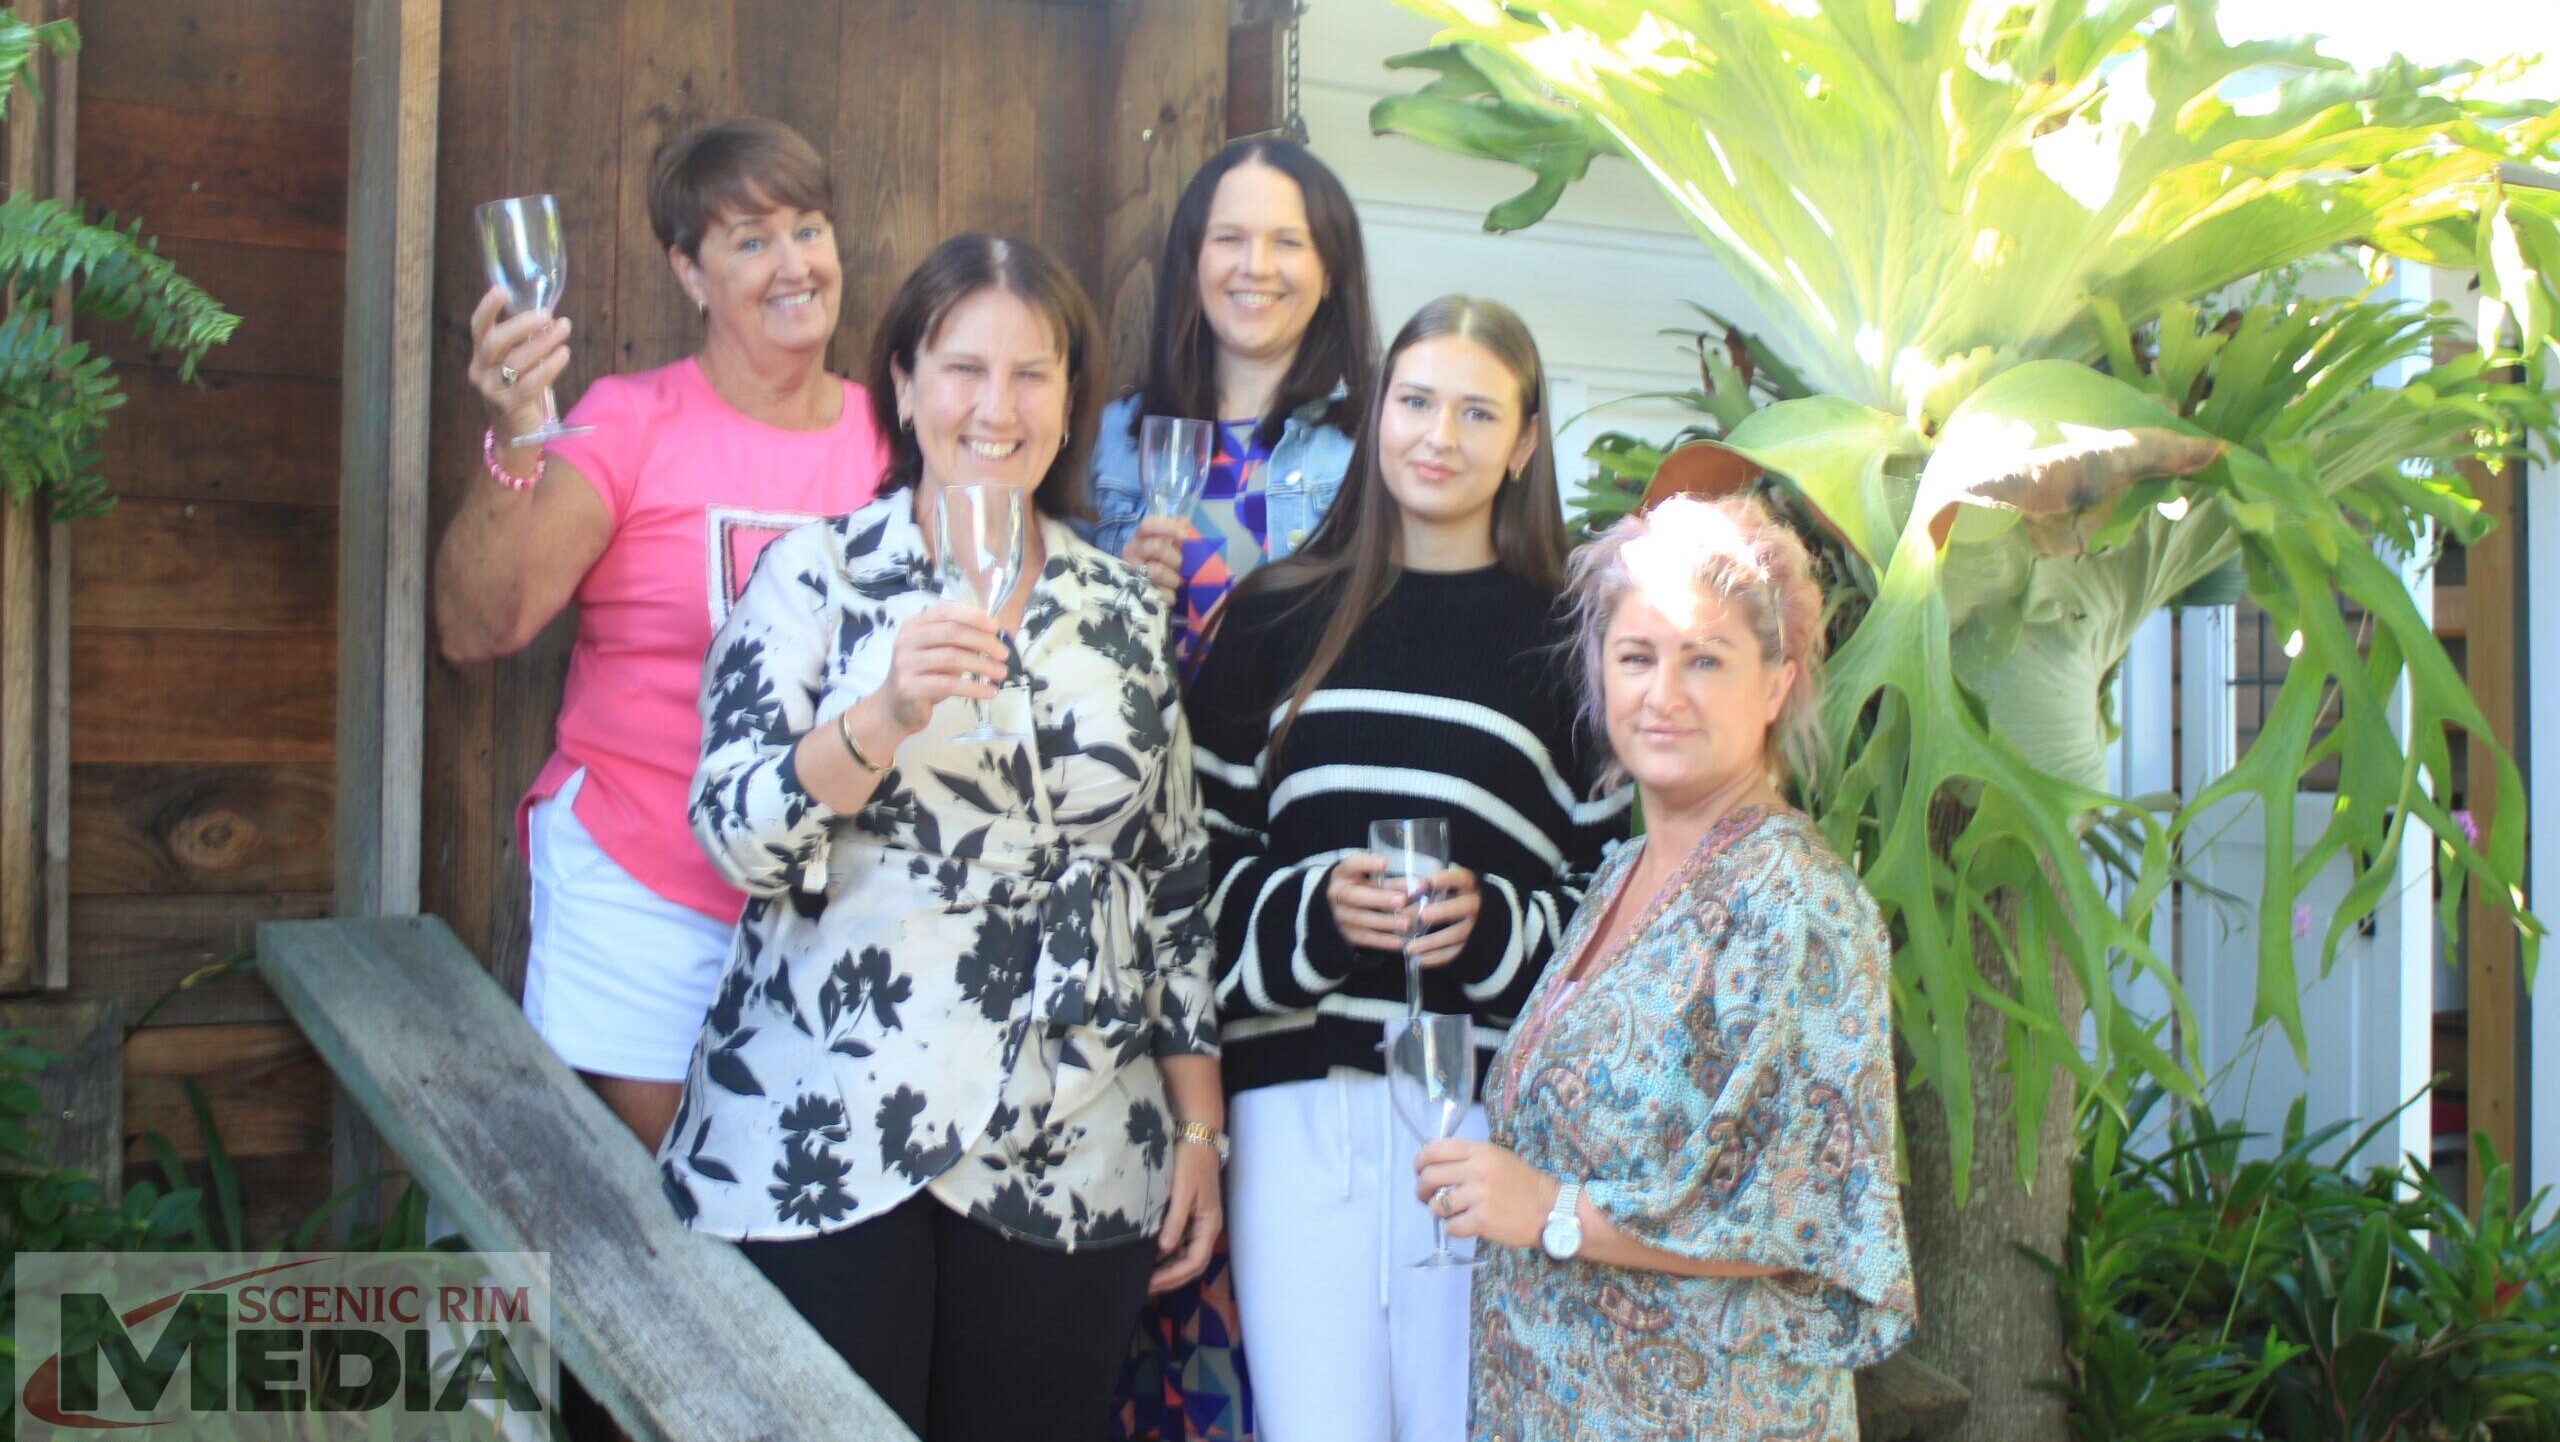 An epic girl’s night out! - The Canungra Times